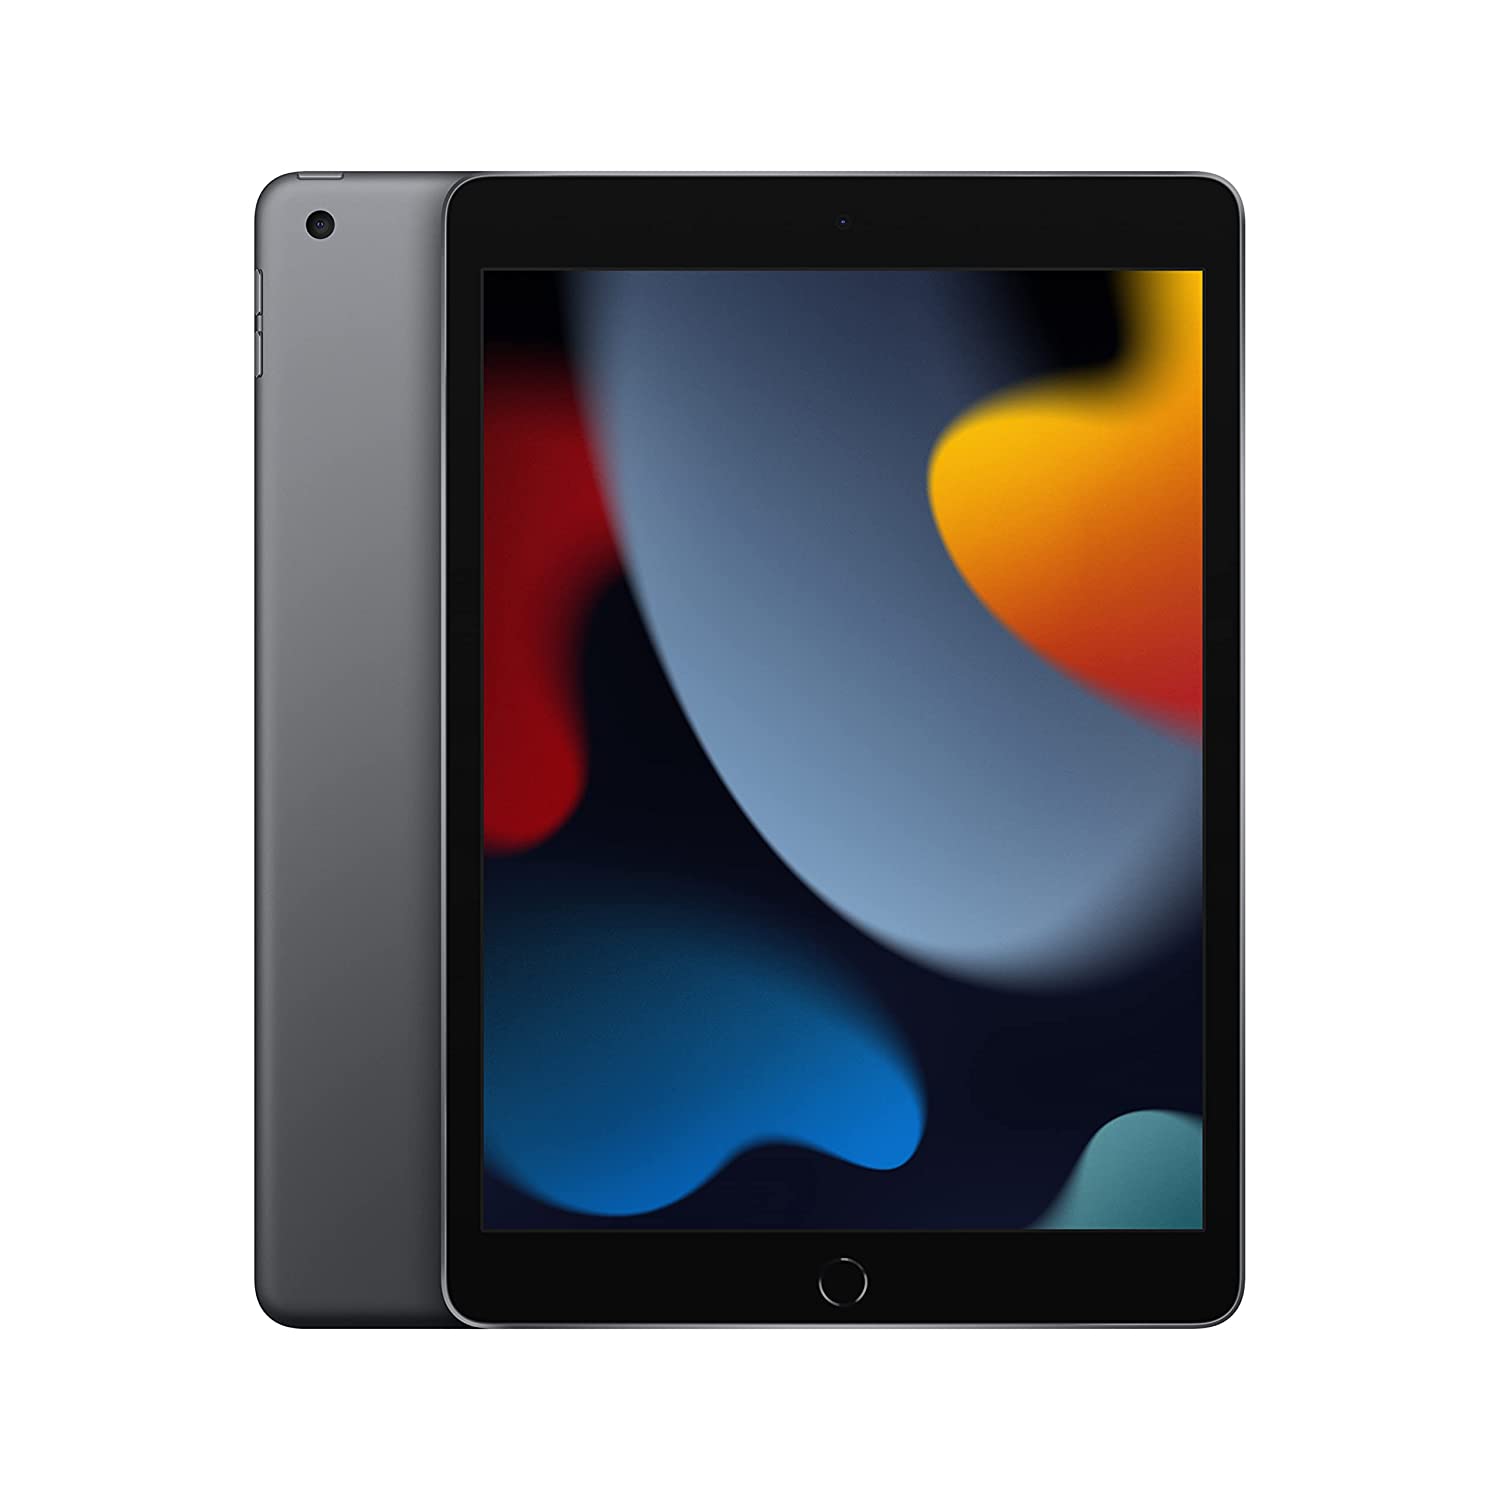 Amazon Festival Sale: This will not get great deals on iPad and tablet, 45% discount will be available in Amazon sale